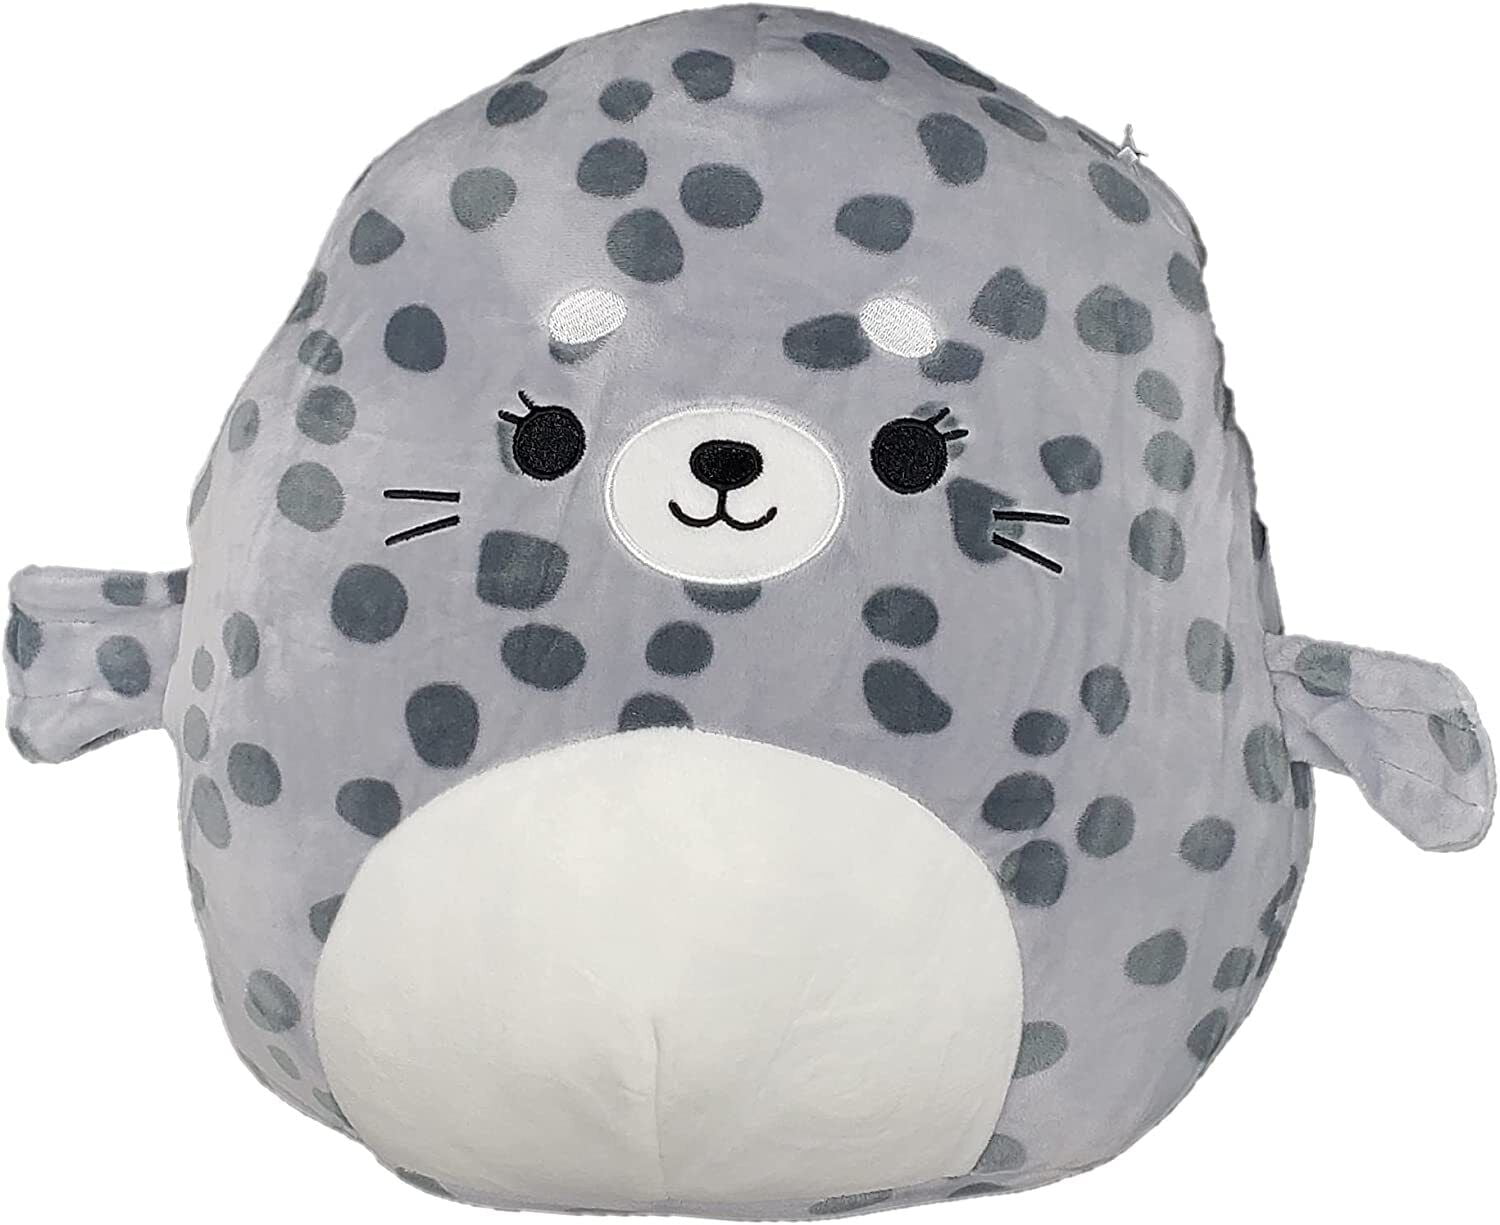 Squishmallows 10" Seal - Odile, The Stuffed Animal Plush Toy